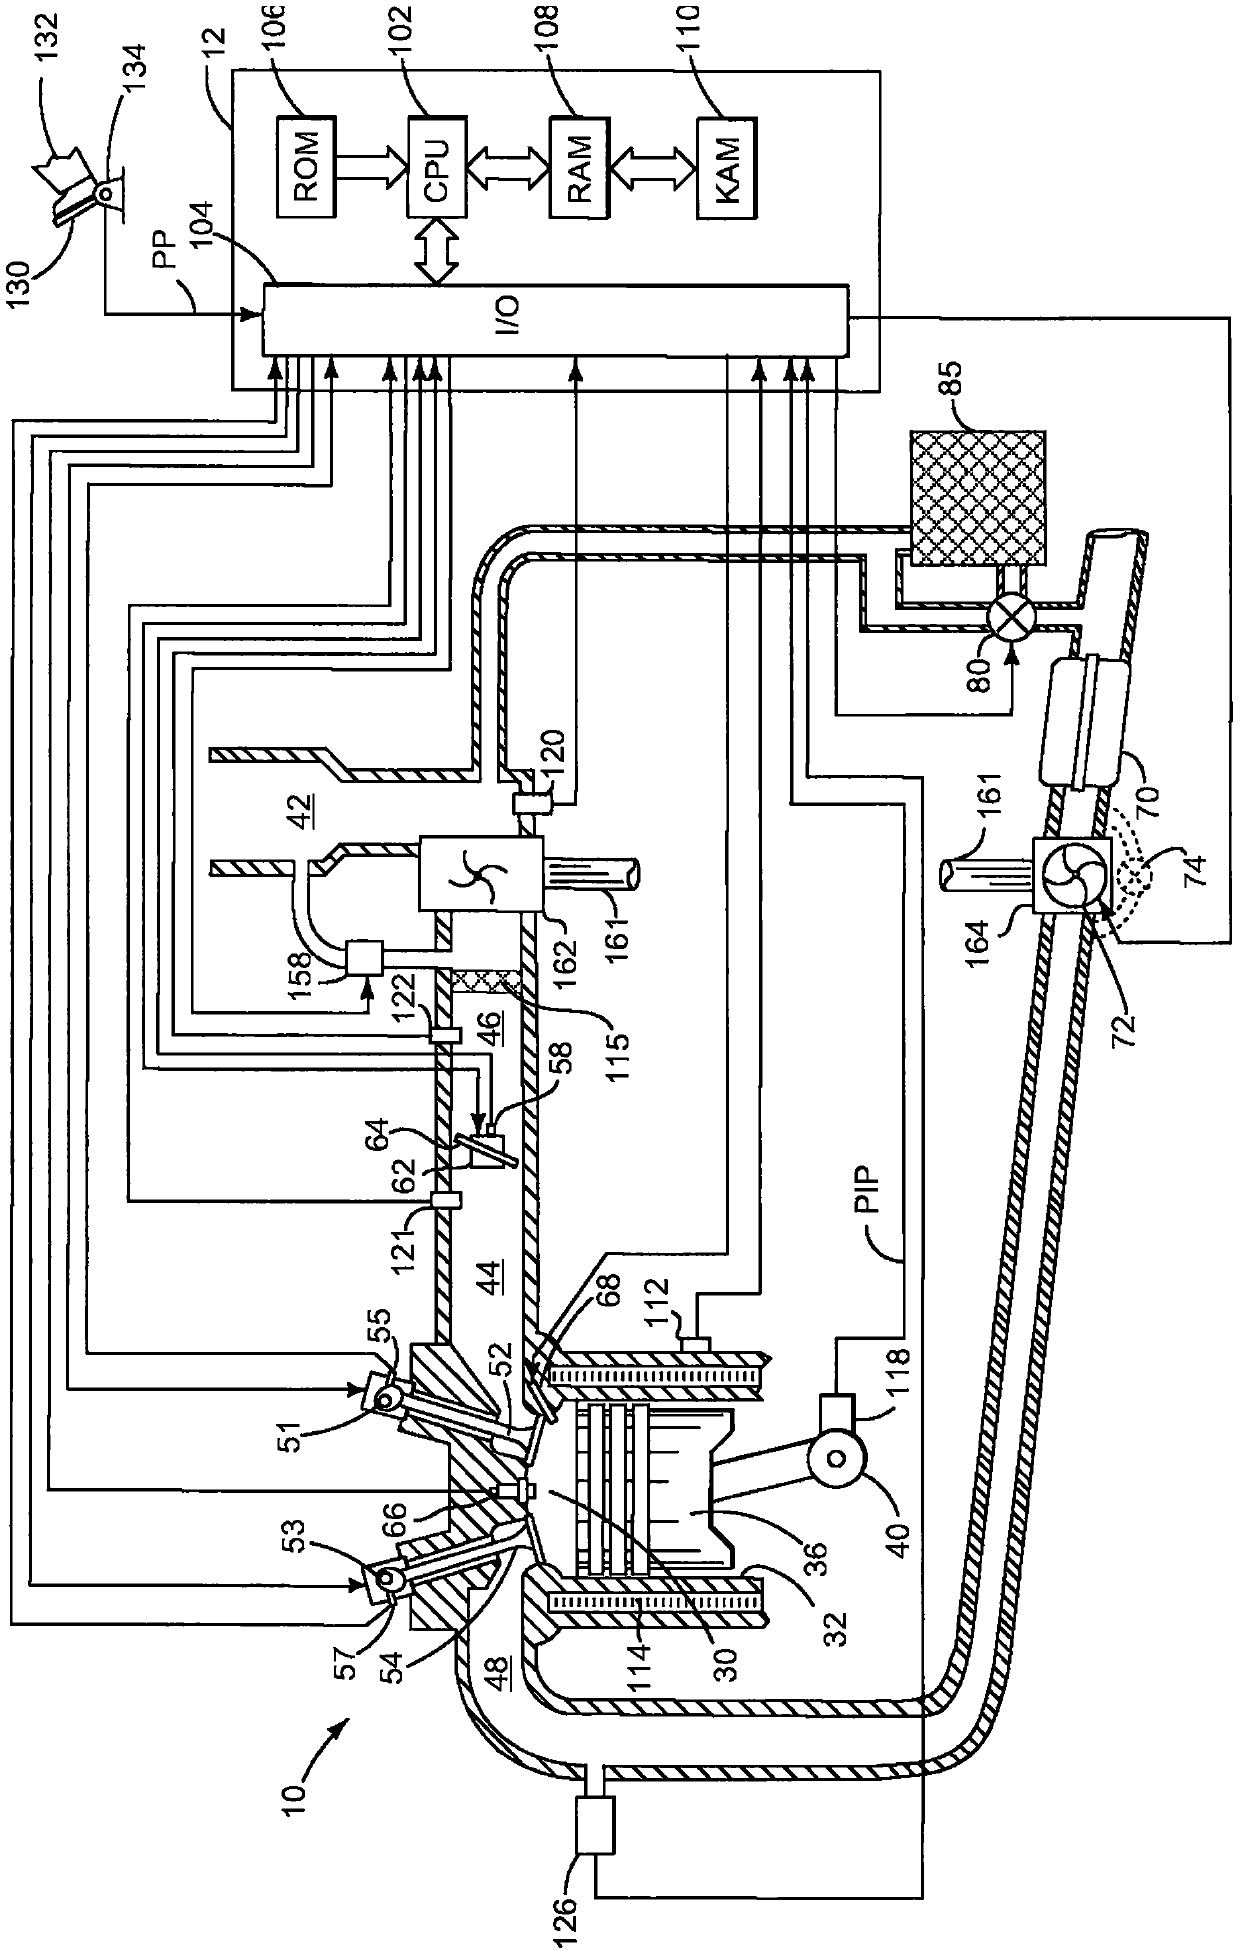 internal combustion engine with turbine